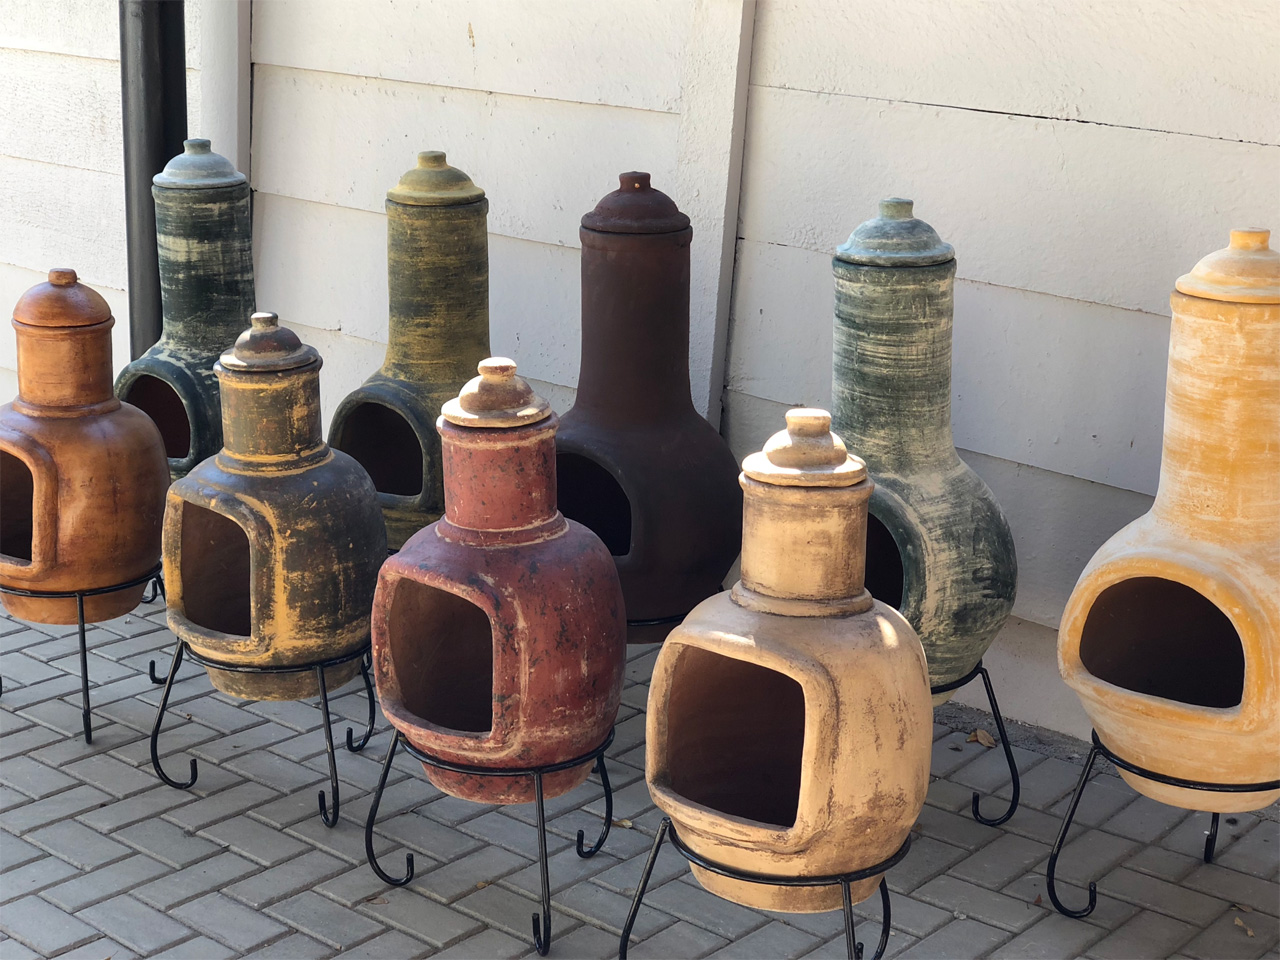 Chimineas Fire Pots Handmade Clay, Mexican Ceramic Fire Pits